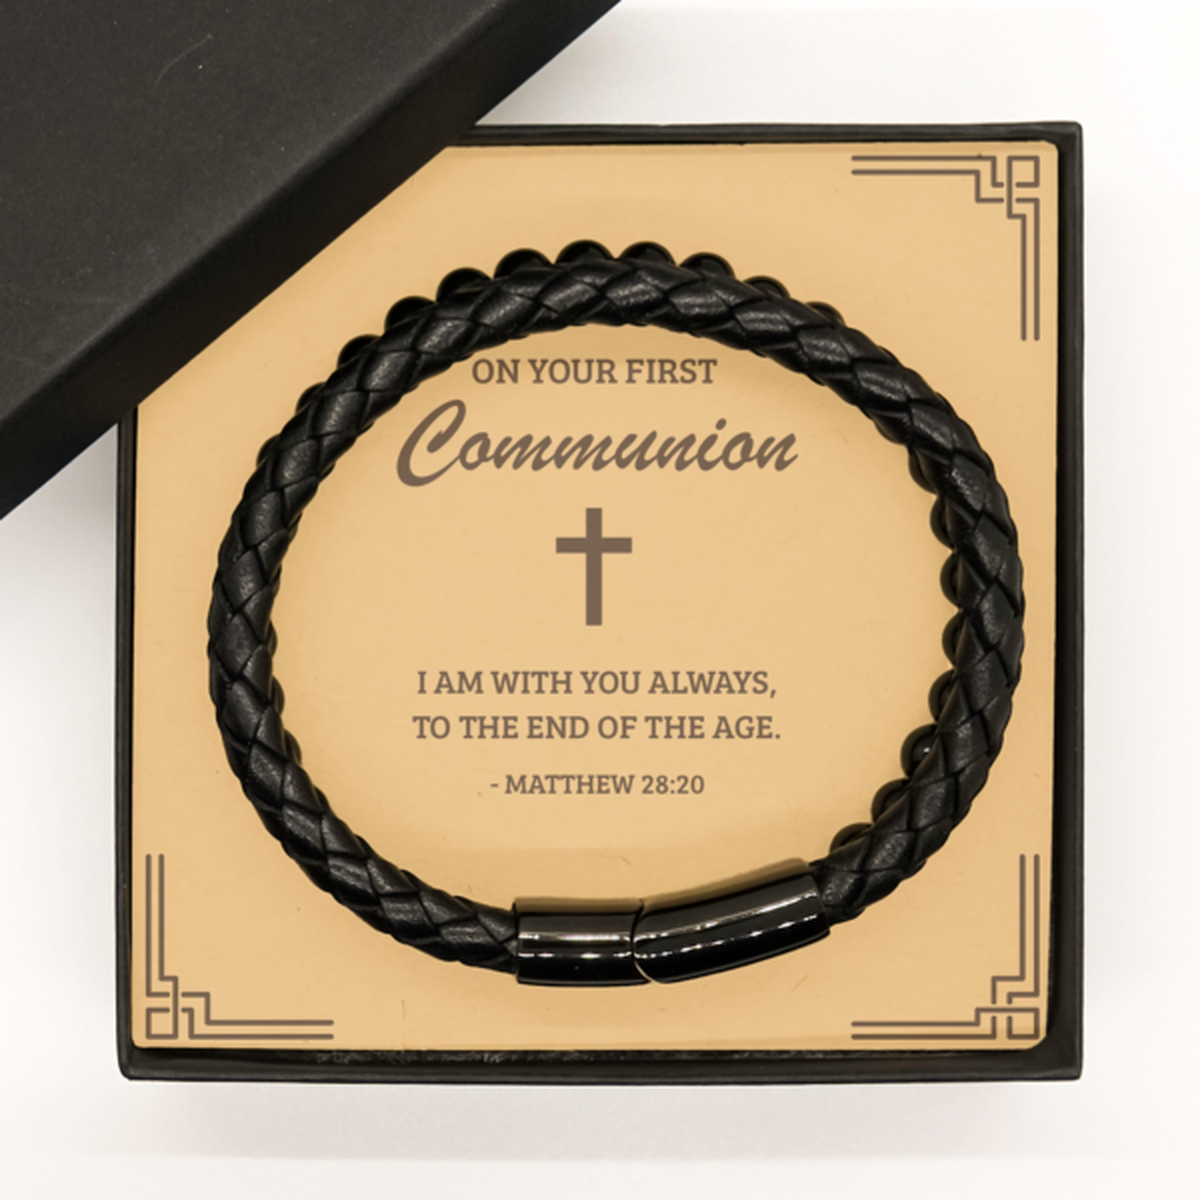 First Communion Gifts for Teenage Boys, I am with you always, Stone Leather Bracelet with Bible Verse Message Card, Religious Catholic Bracelet for Son, Grandson, Dad, Godfather